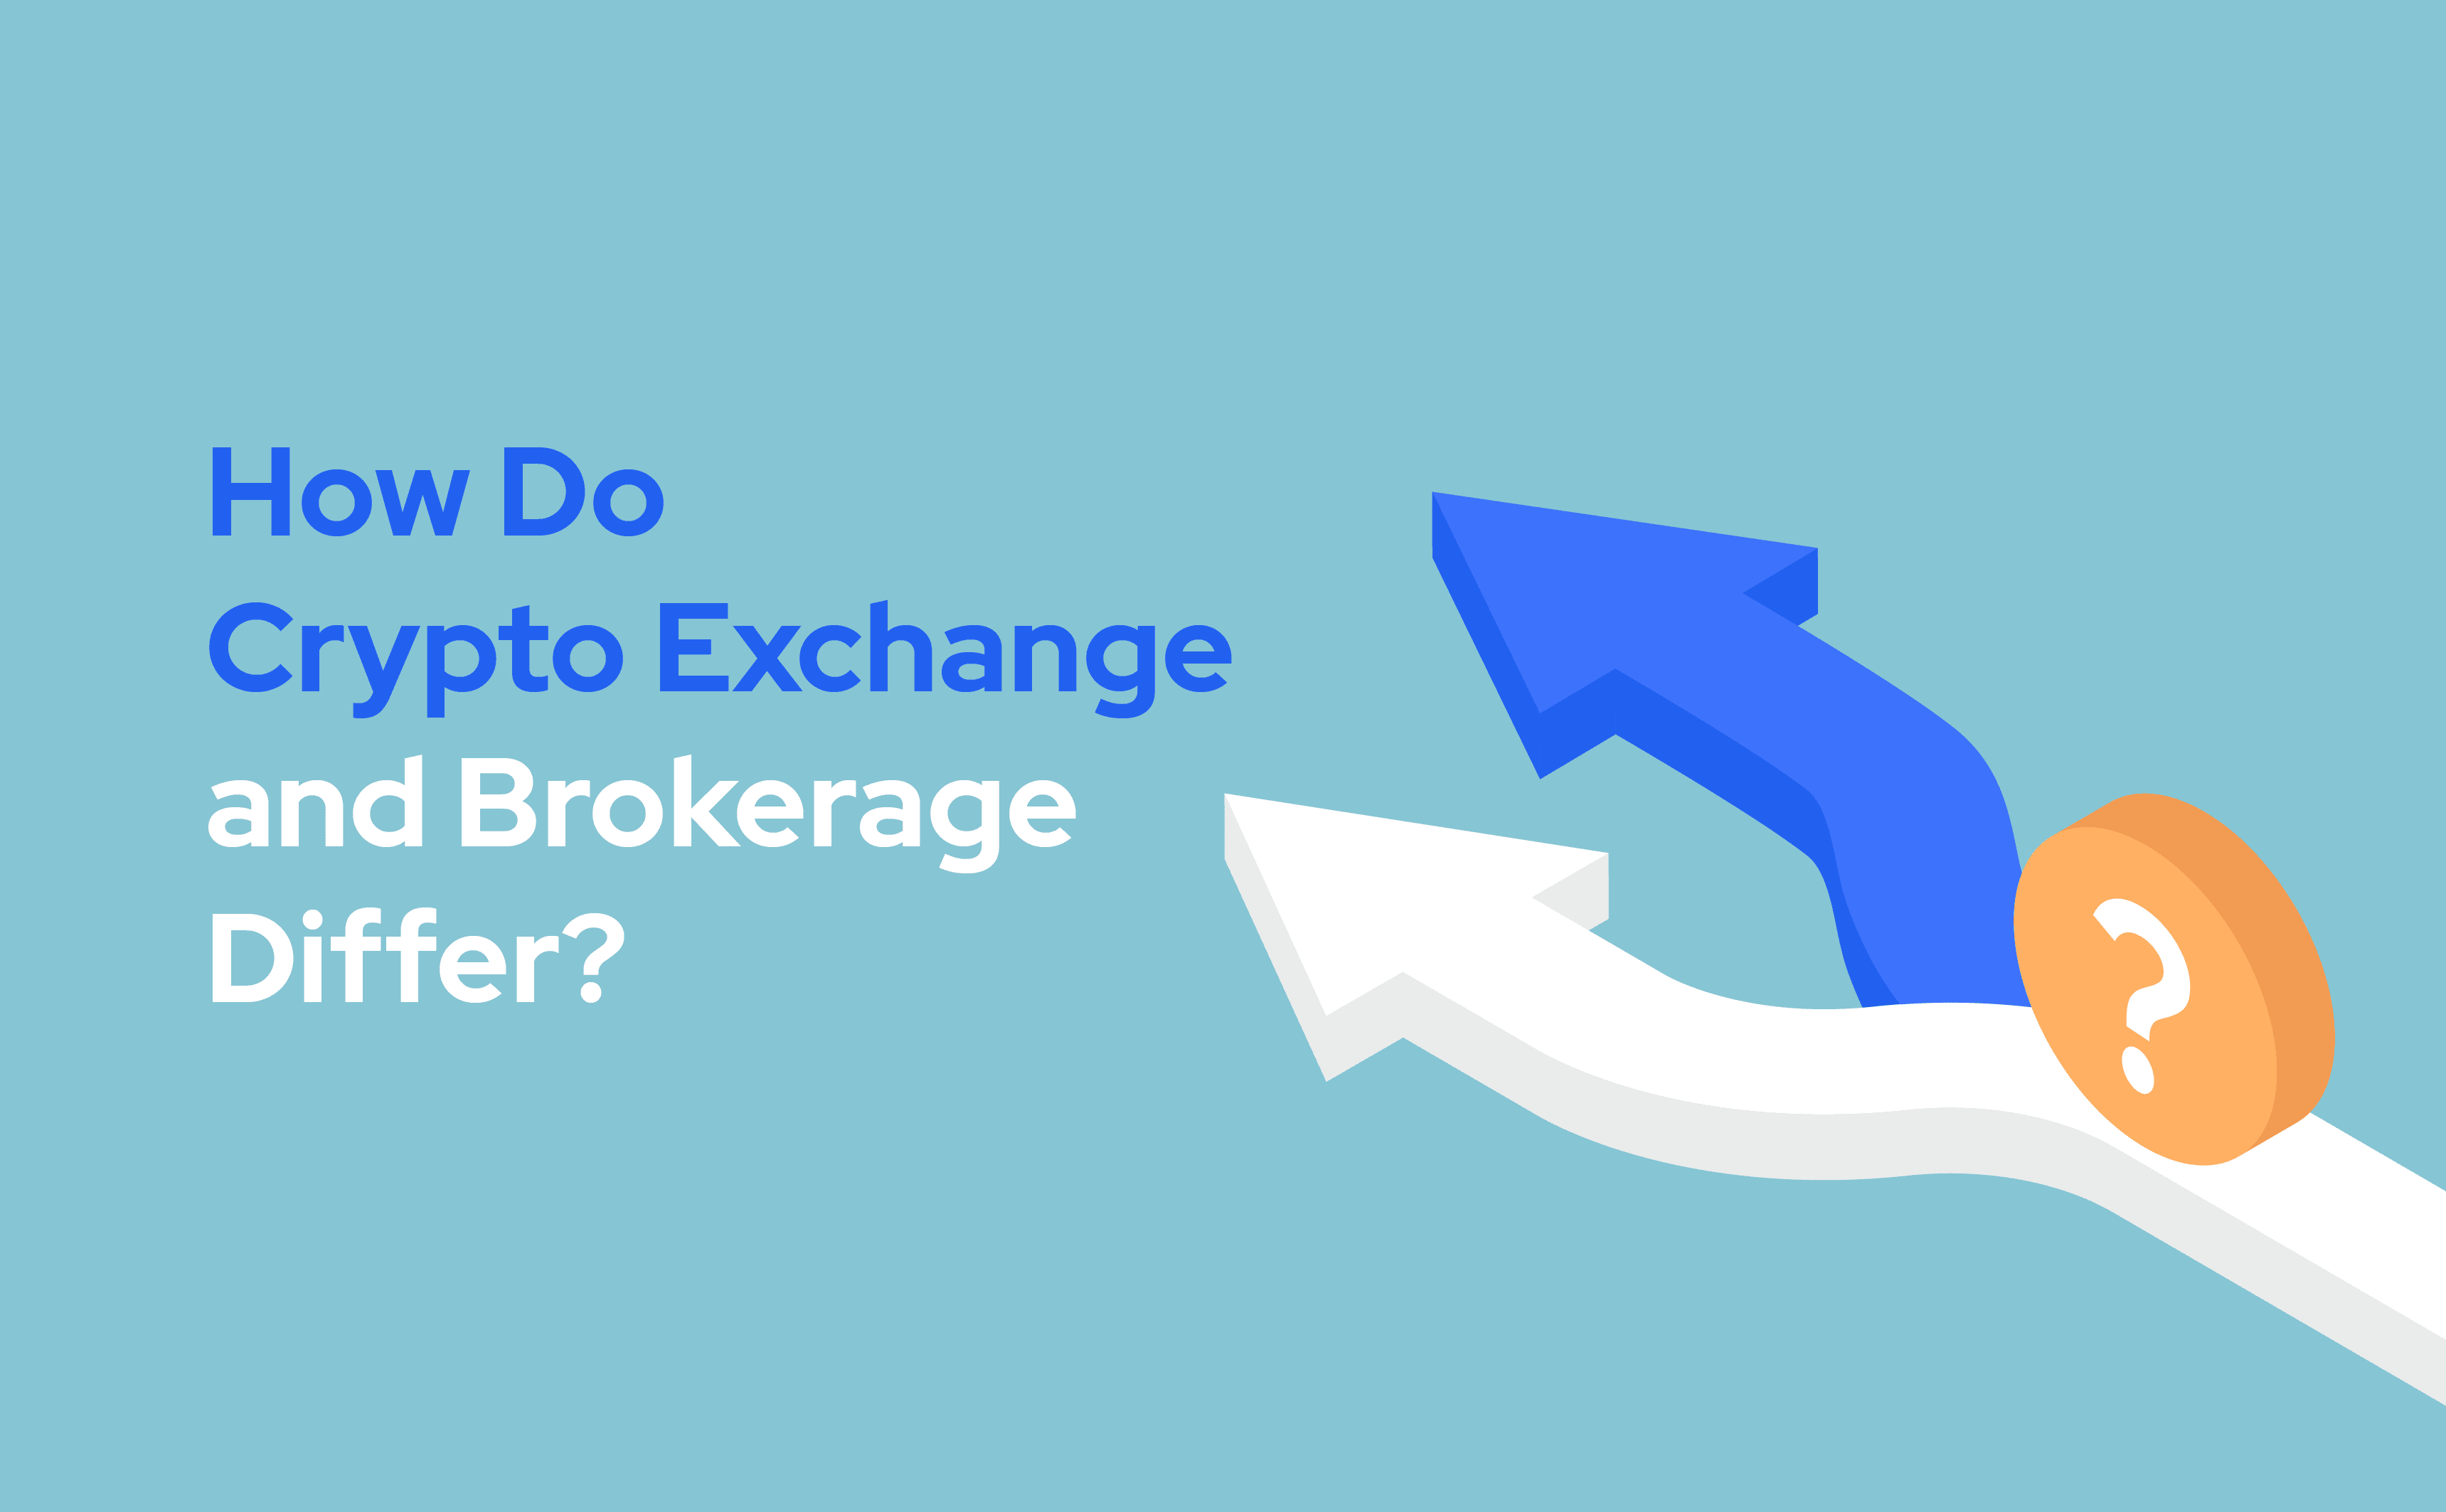 Differences between crypto broker and exchange services.